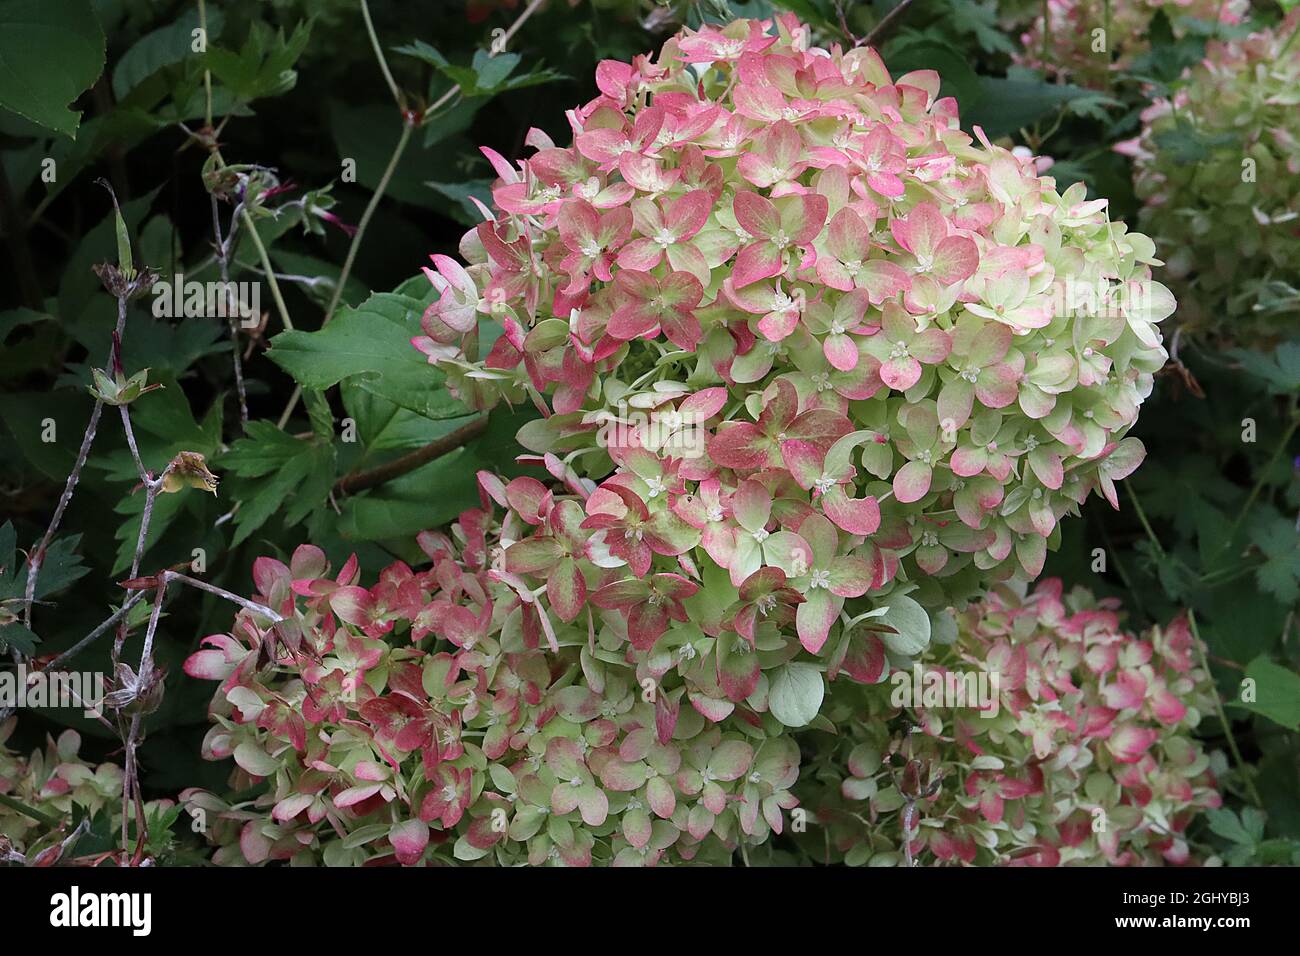 Hydrangea paniculata ‘Limelight’ Hortensia Limelight – conical clusters of pale green and medium pink flowers,  August, England, UK Stock Photo